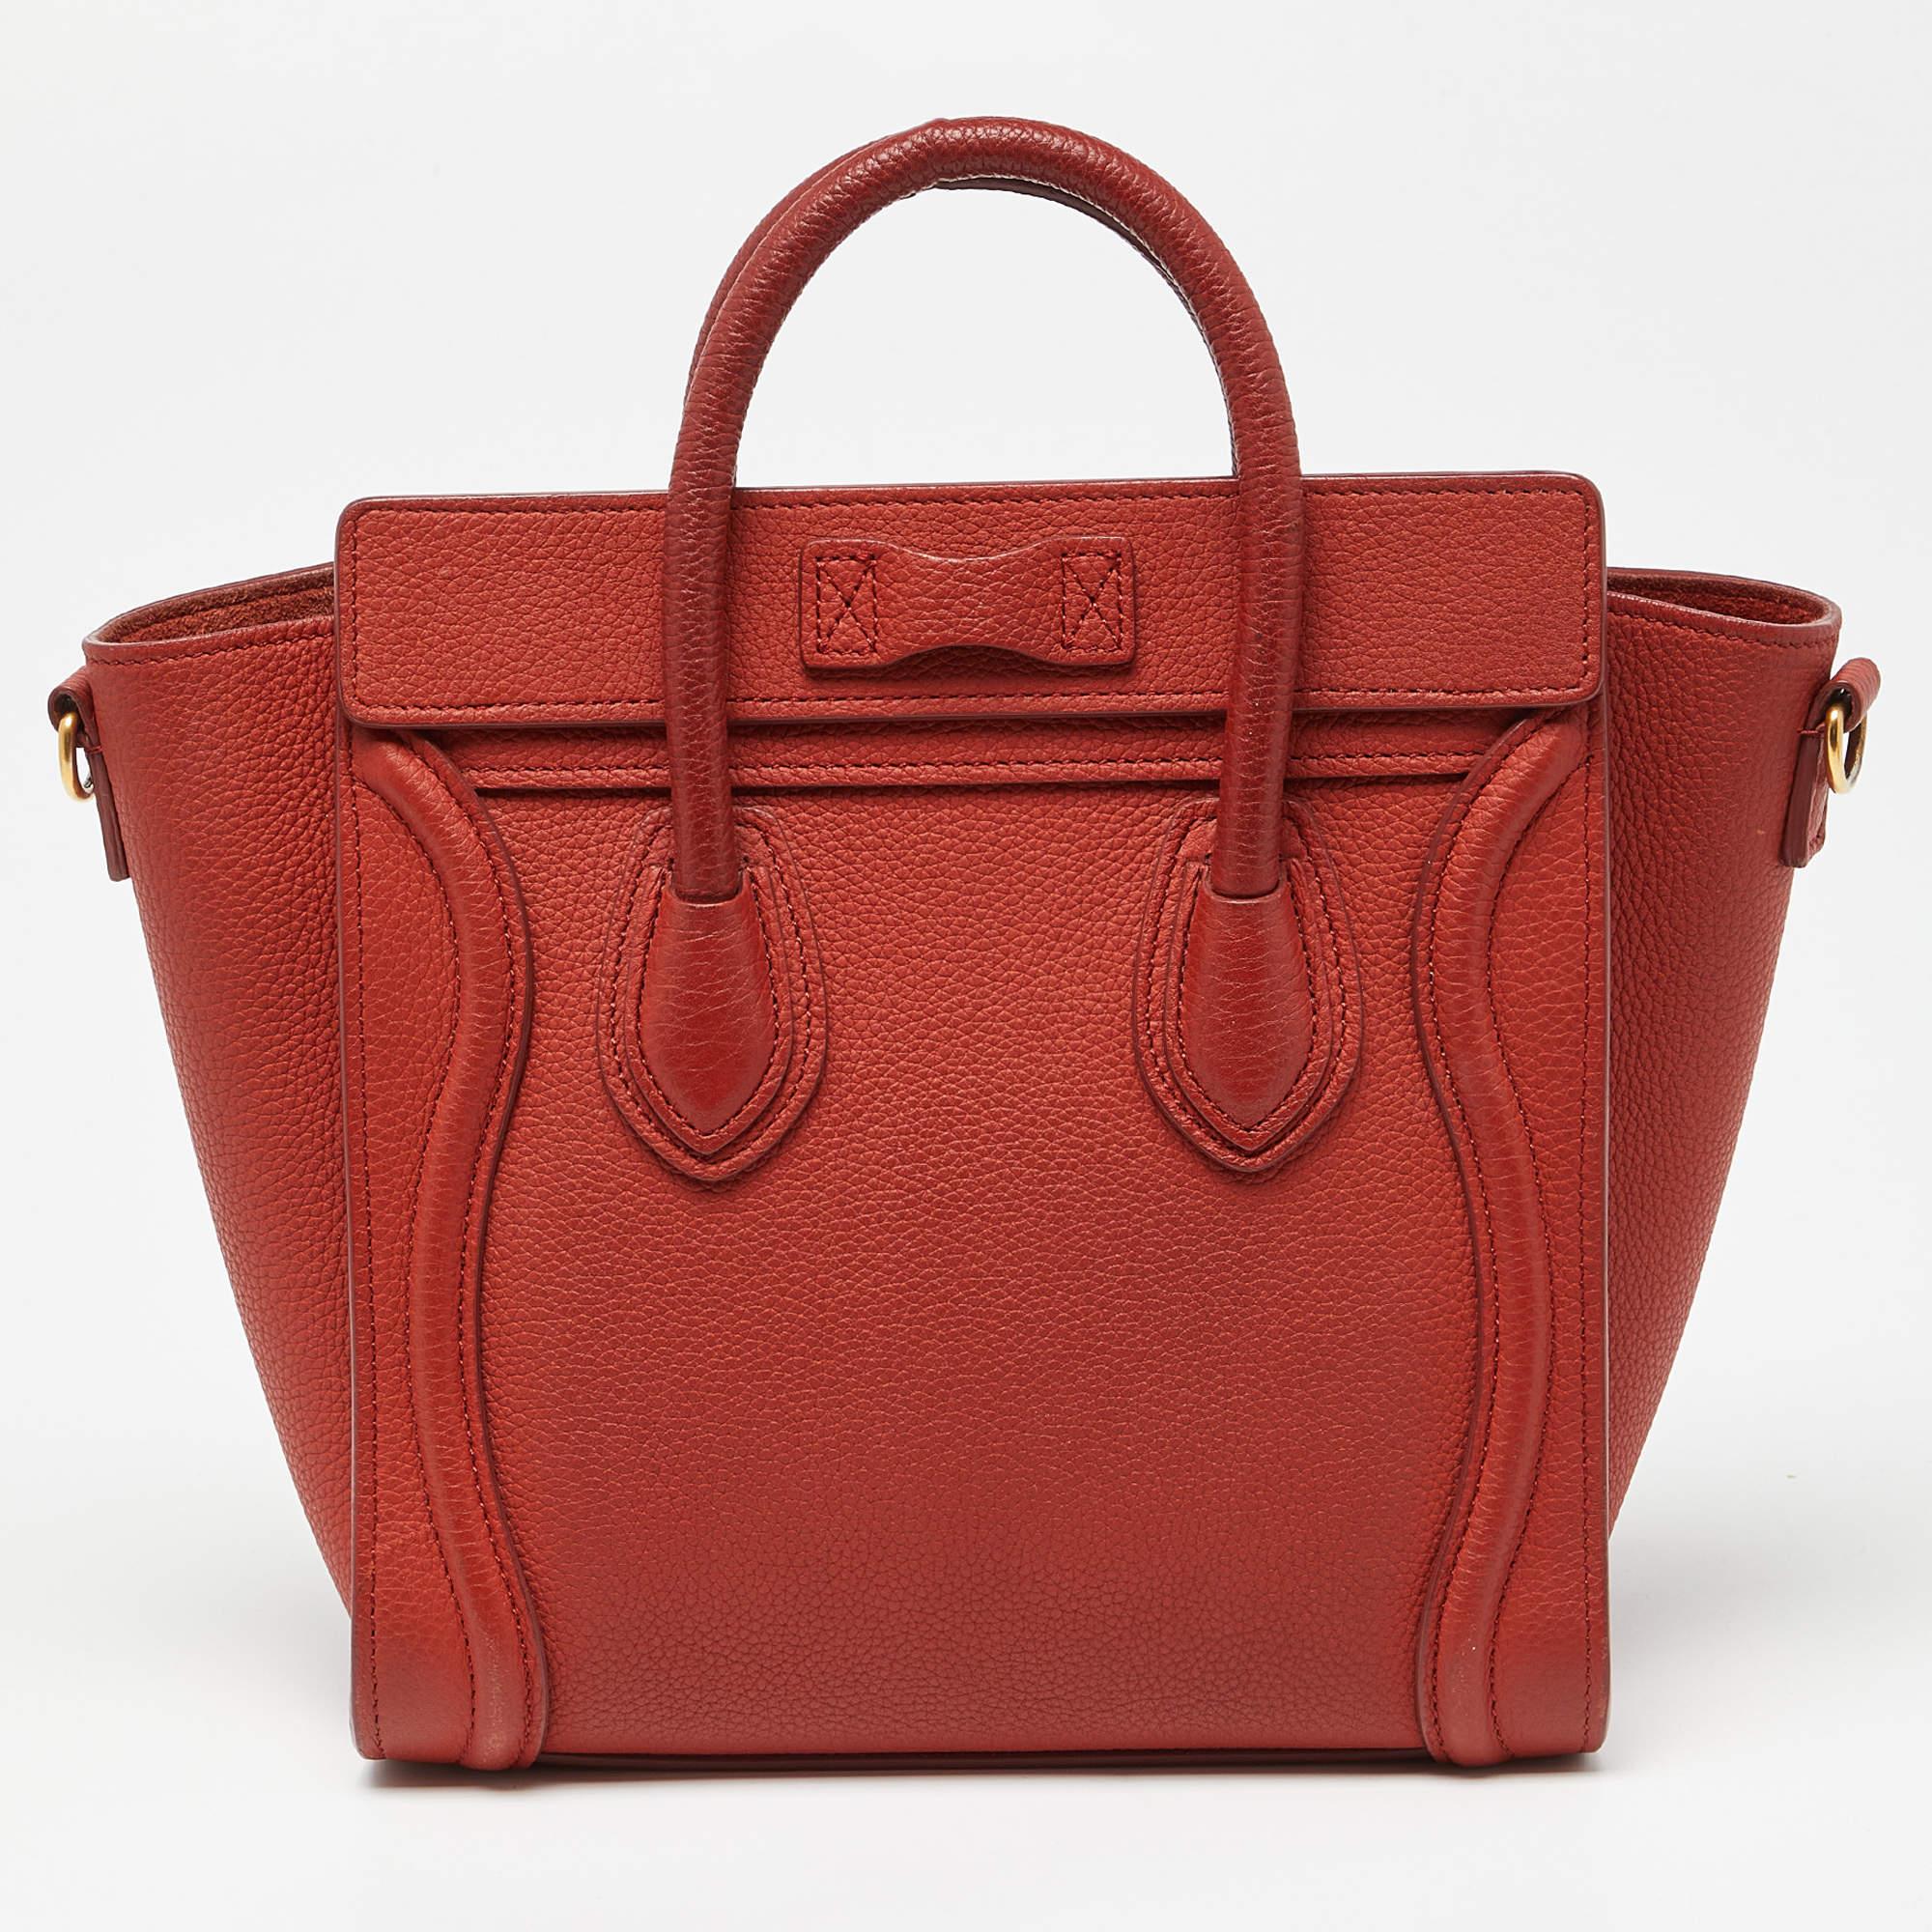 The nano Luggage tote from Celine is one of the most popular handbags in the world. This tote is crafted from leather and designed in a rust brown shade. It comes with rolled top handles and a front zip pocket. The bag is equipped with a well-sized